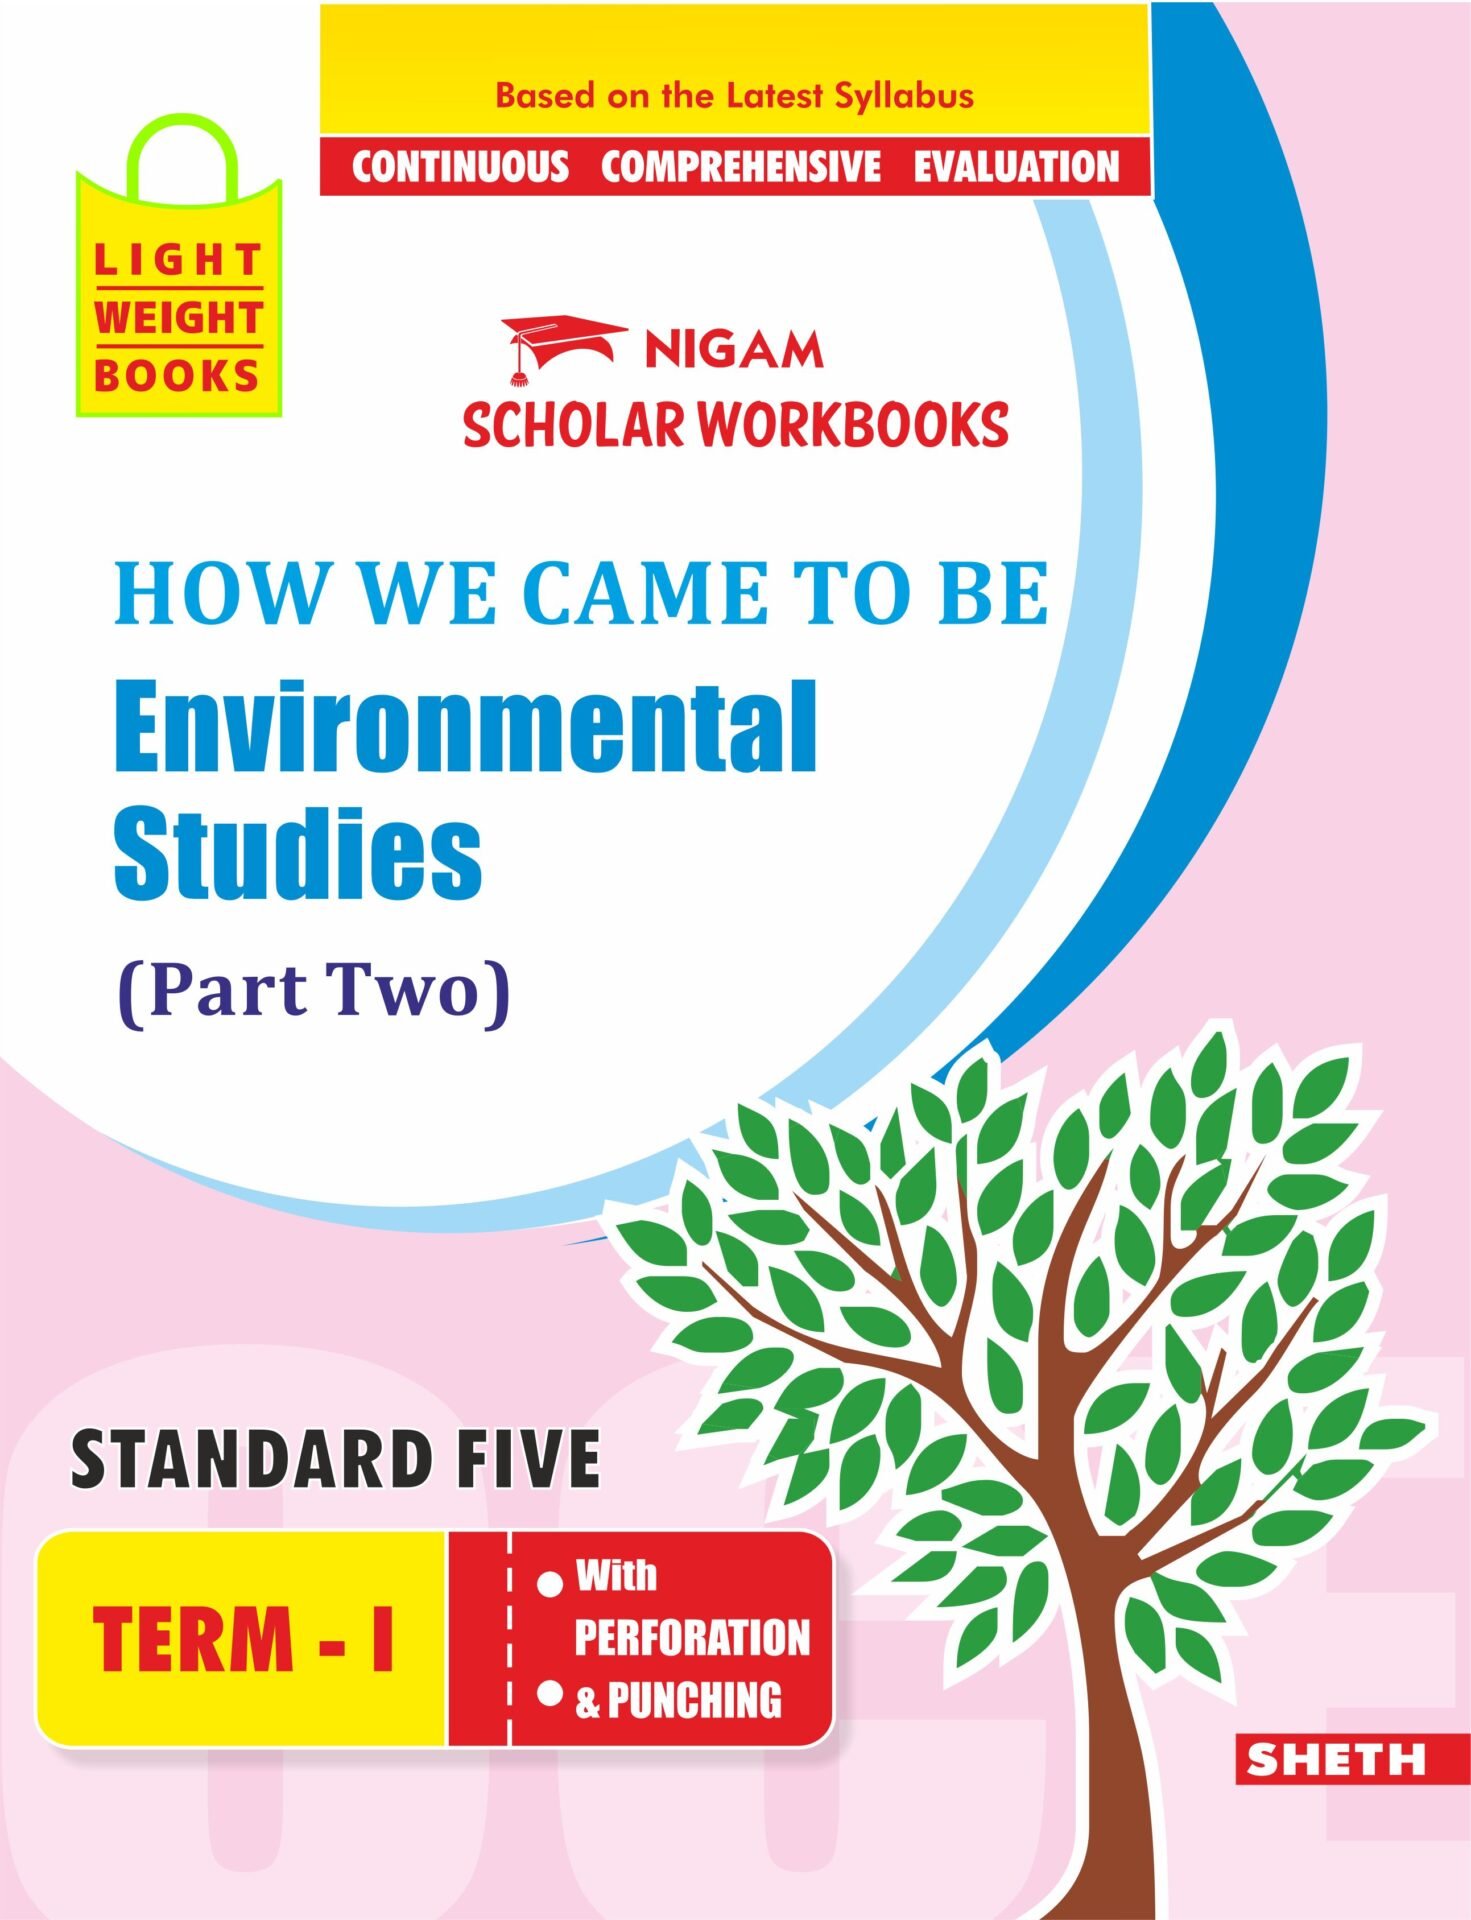 CCE Pattern Nigam Scholar Workbooks How We Came to Be Environmental Studies EVS Part Two Standard 5 Term 1 1